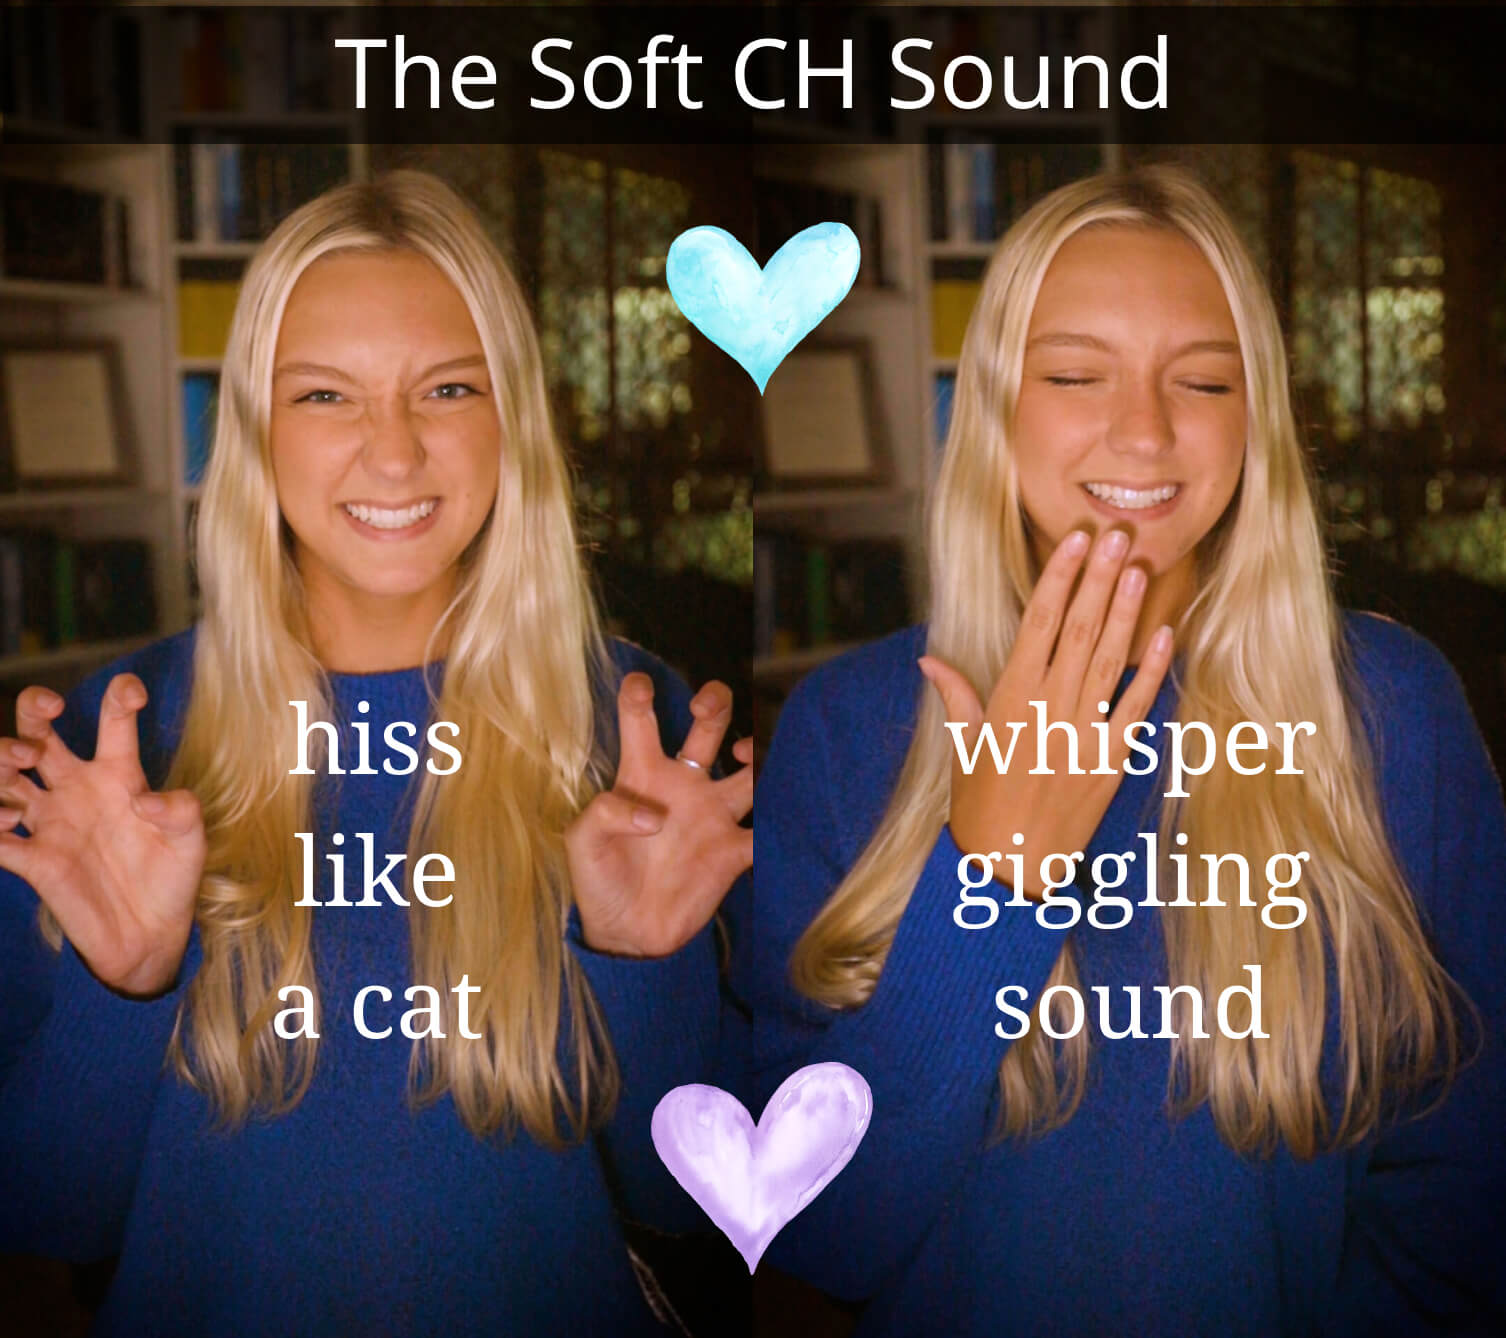 Woman pretending to hiss like a cat and whisper a giggle, demonstrating practice tips for the soft pronunciation of the German CH, which is used twice in ich liebe dich.